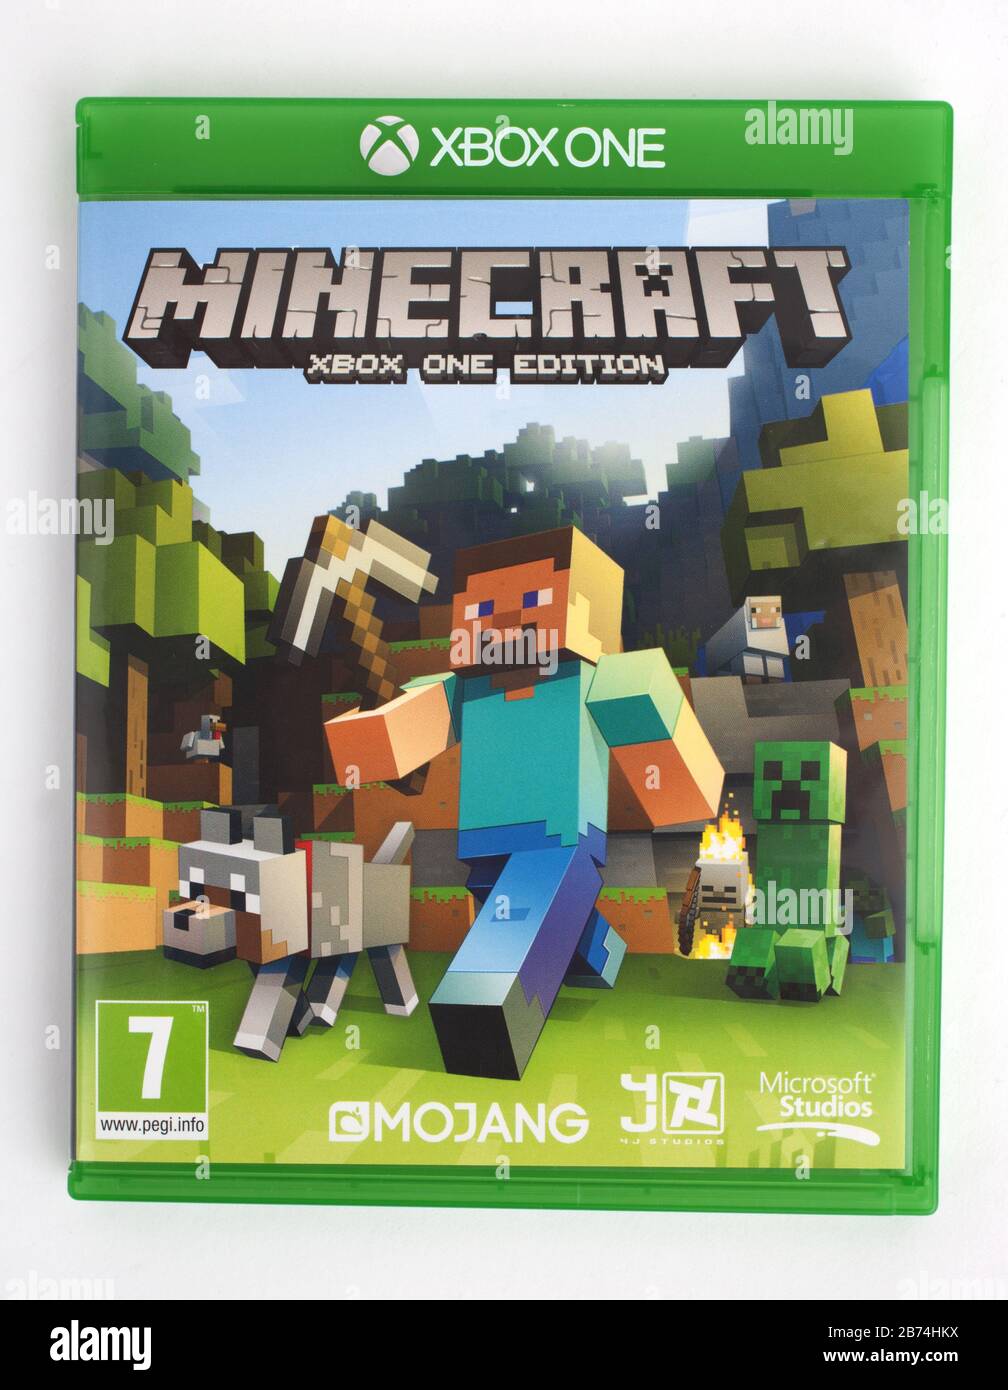 The Xbox game Minecraft by Mojang Stock Photo - Alamy